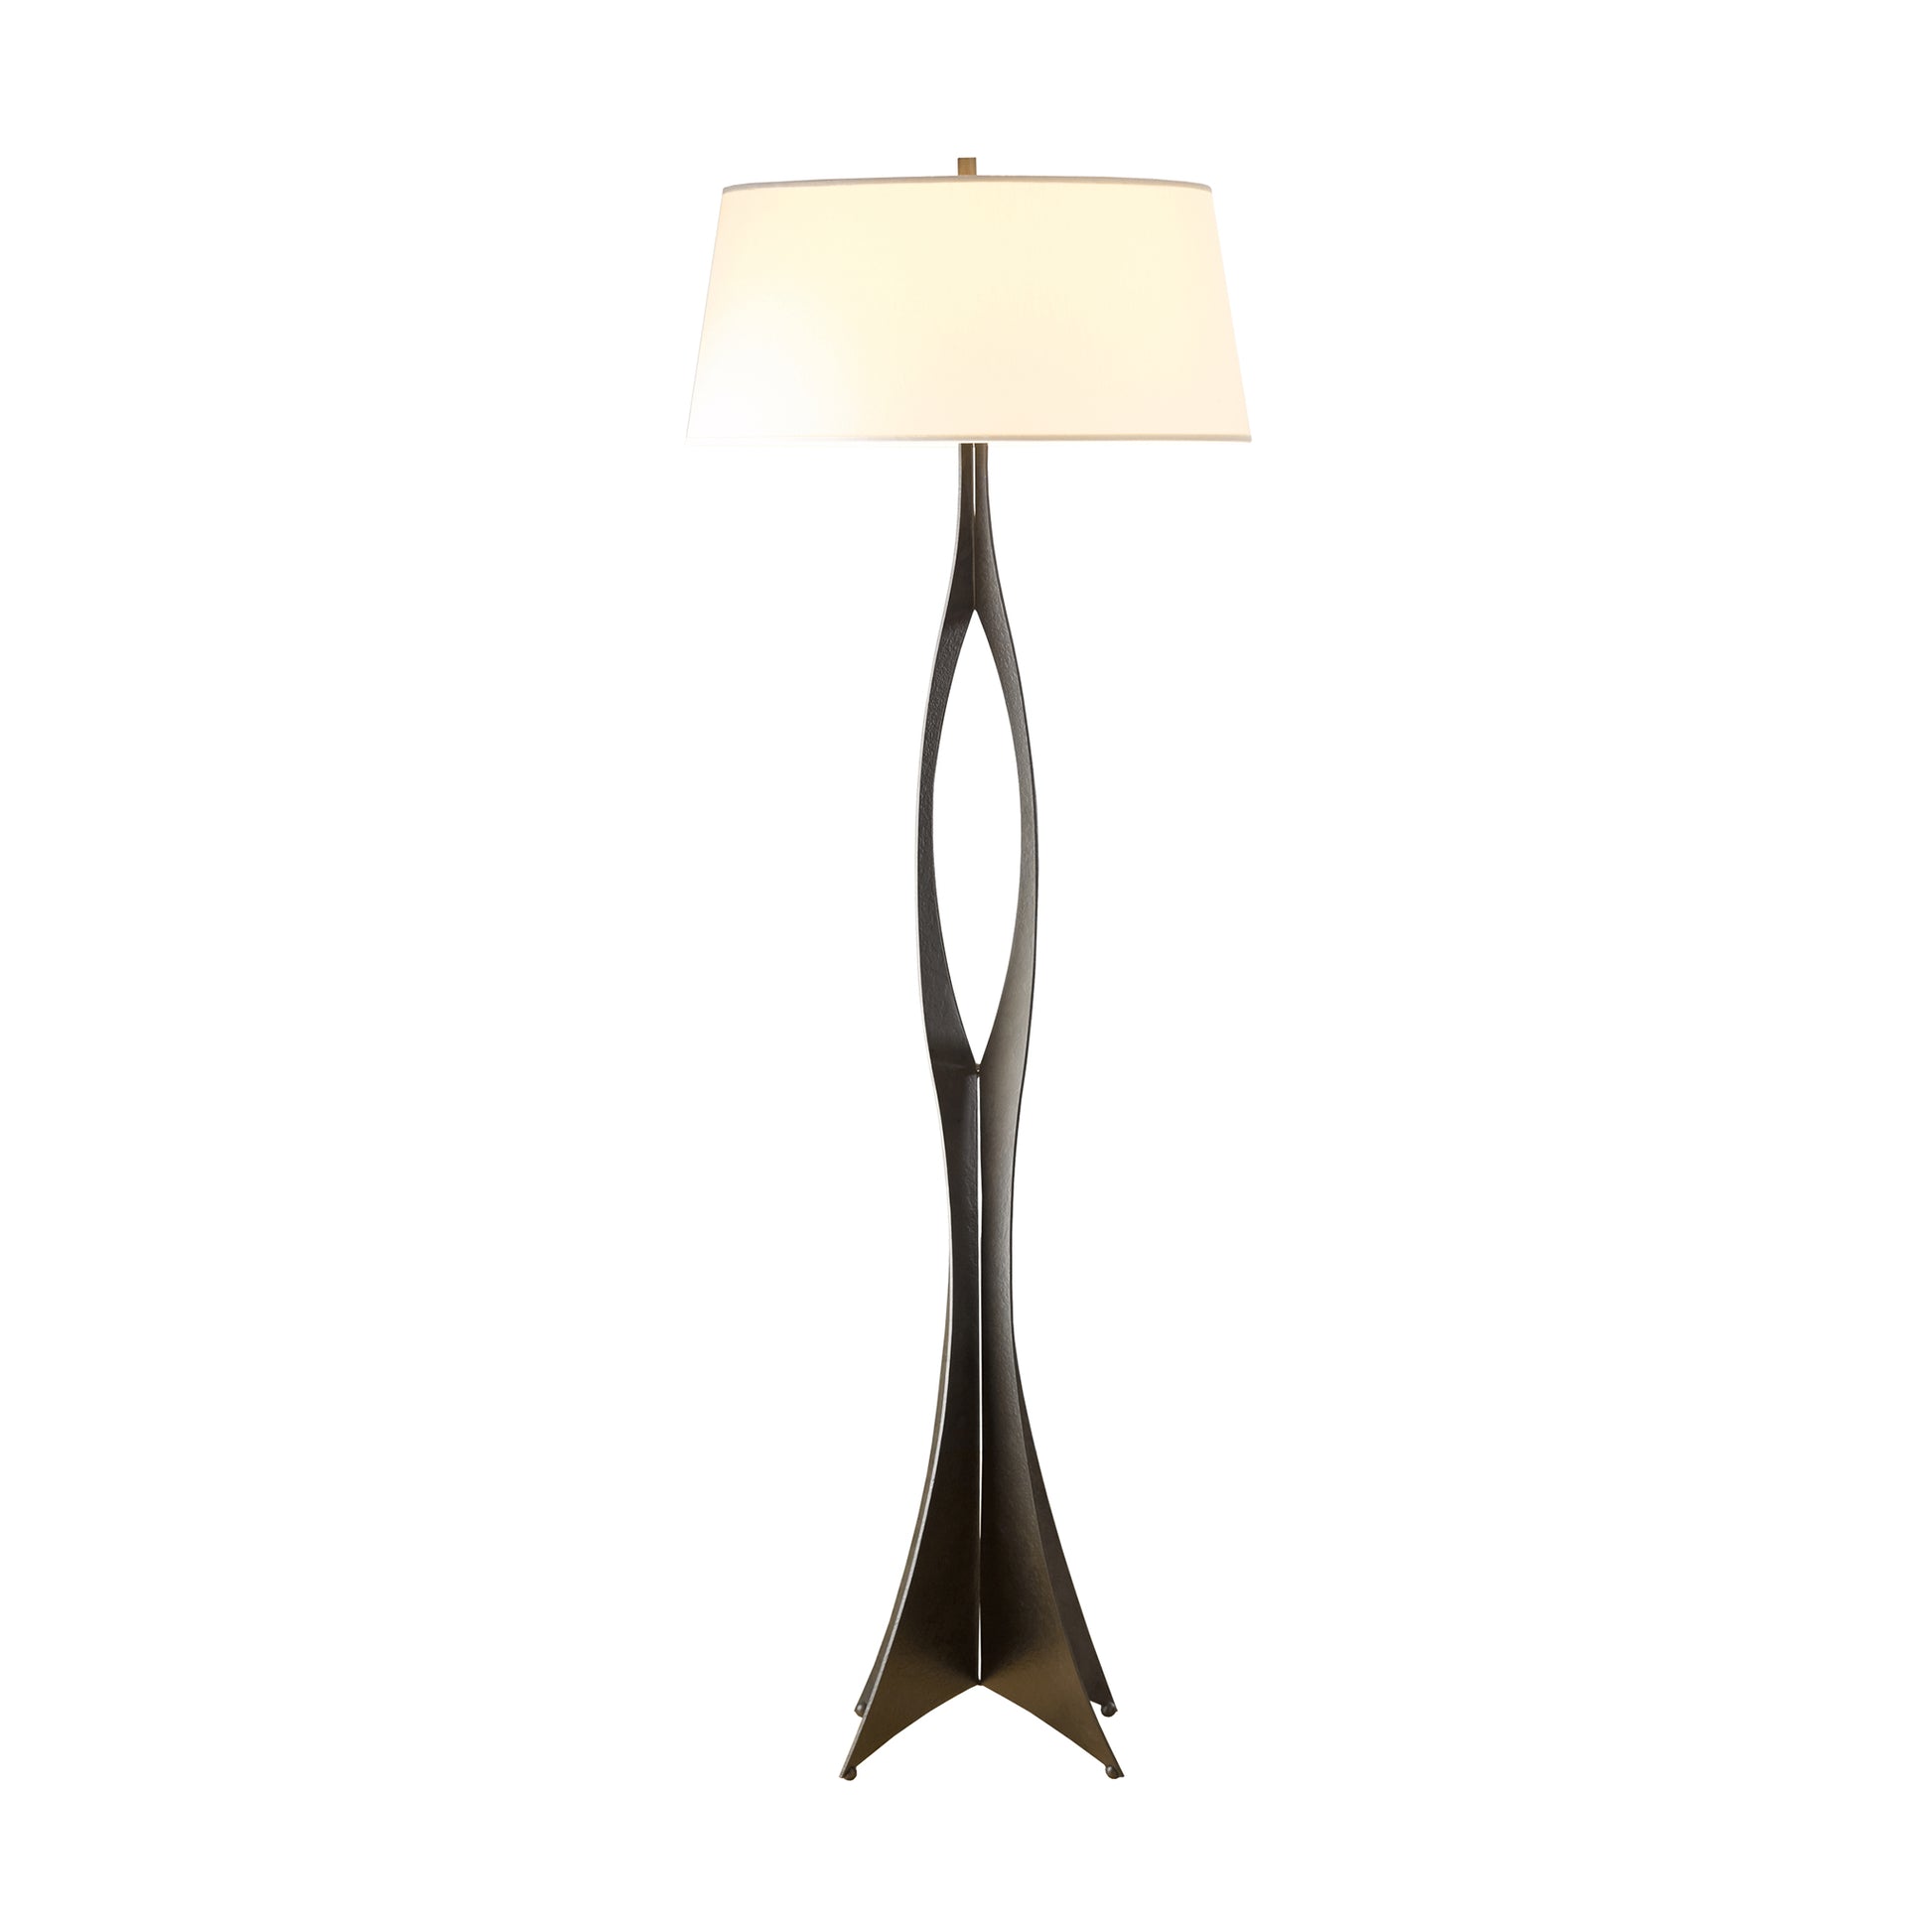 A Hubbardton Forge Moreau Floor Lamp with a metal base and a white shade.